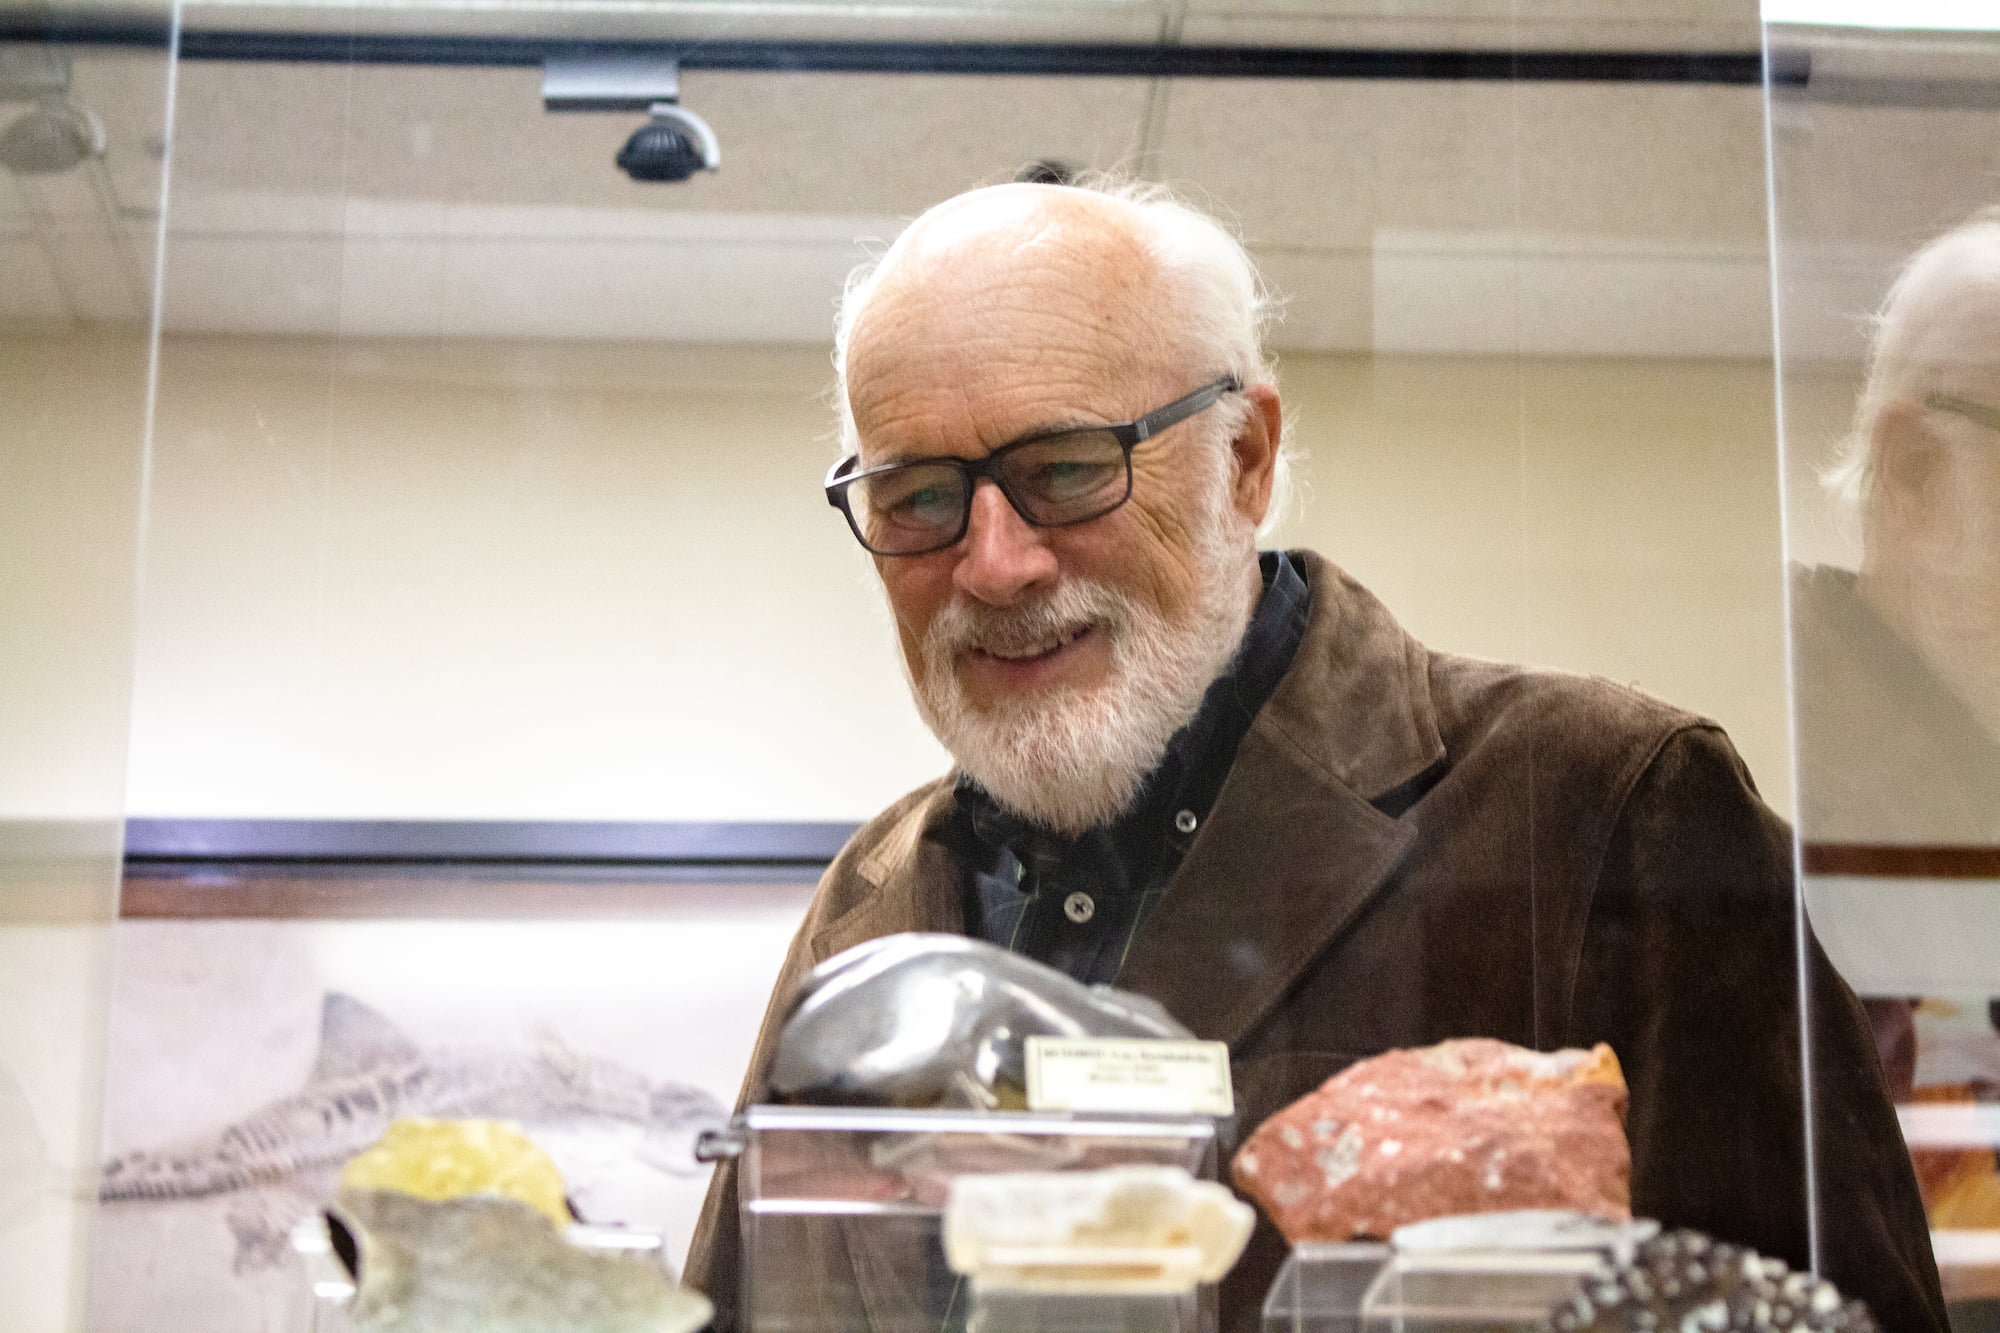 David Lowrie browsed cases in the WSU Geology Mineral Museum